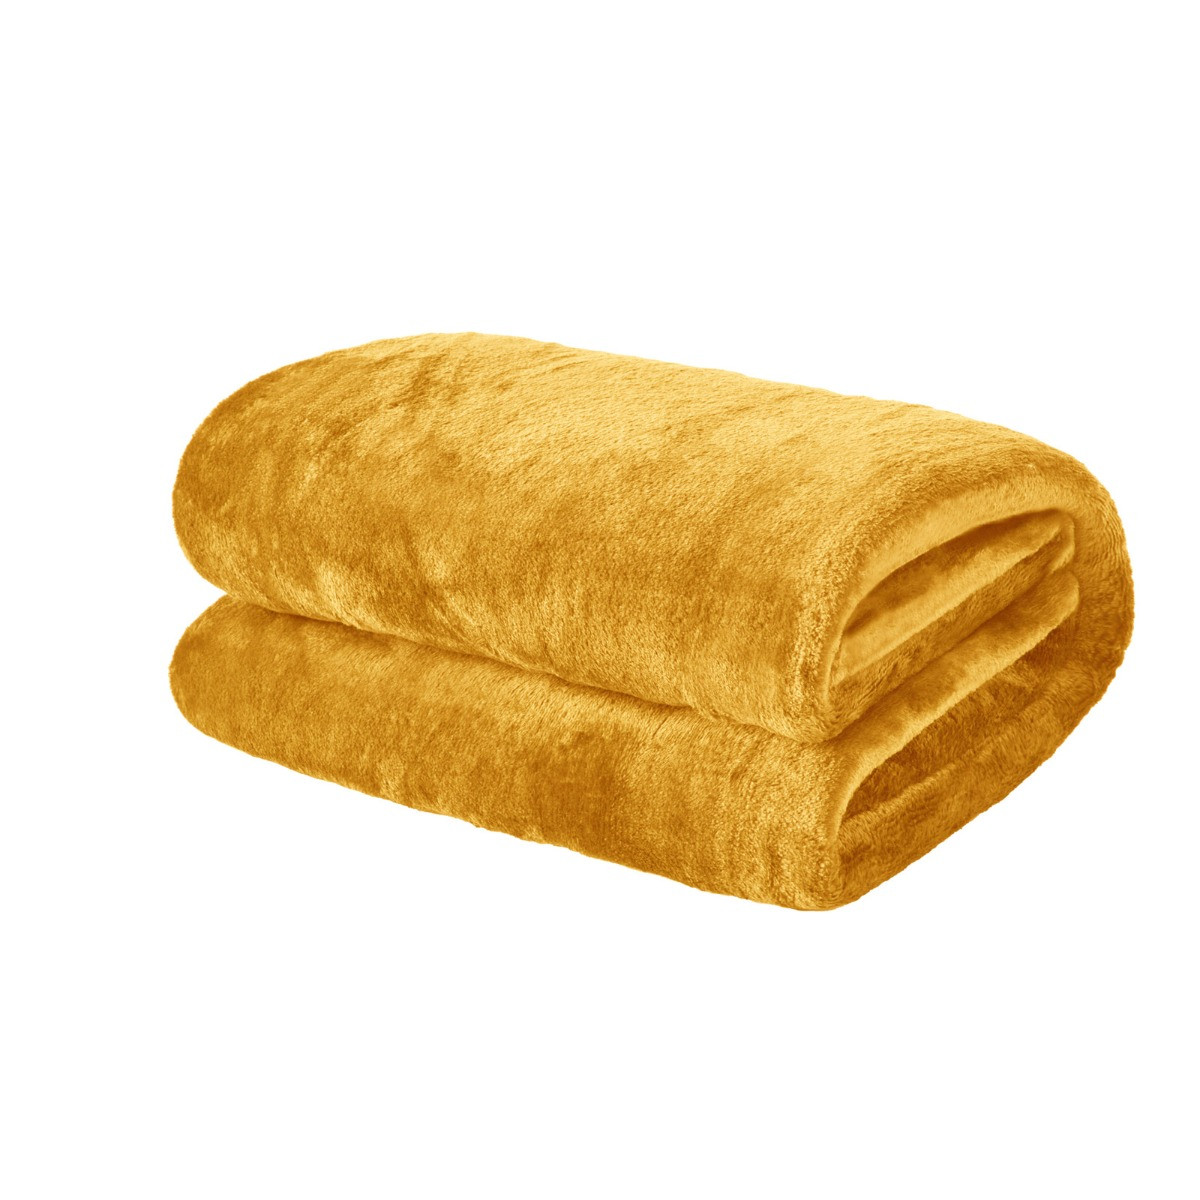 Brentfords Supersoft Throw, Ochre Yellow - 60 x 80 inches>